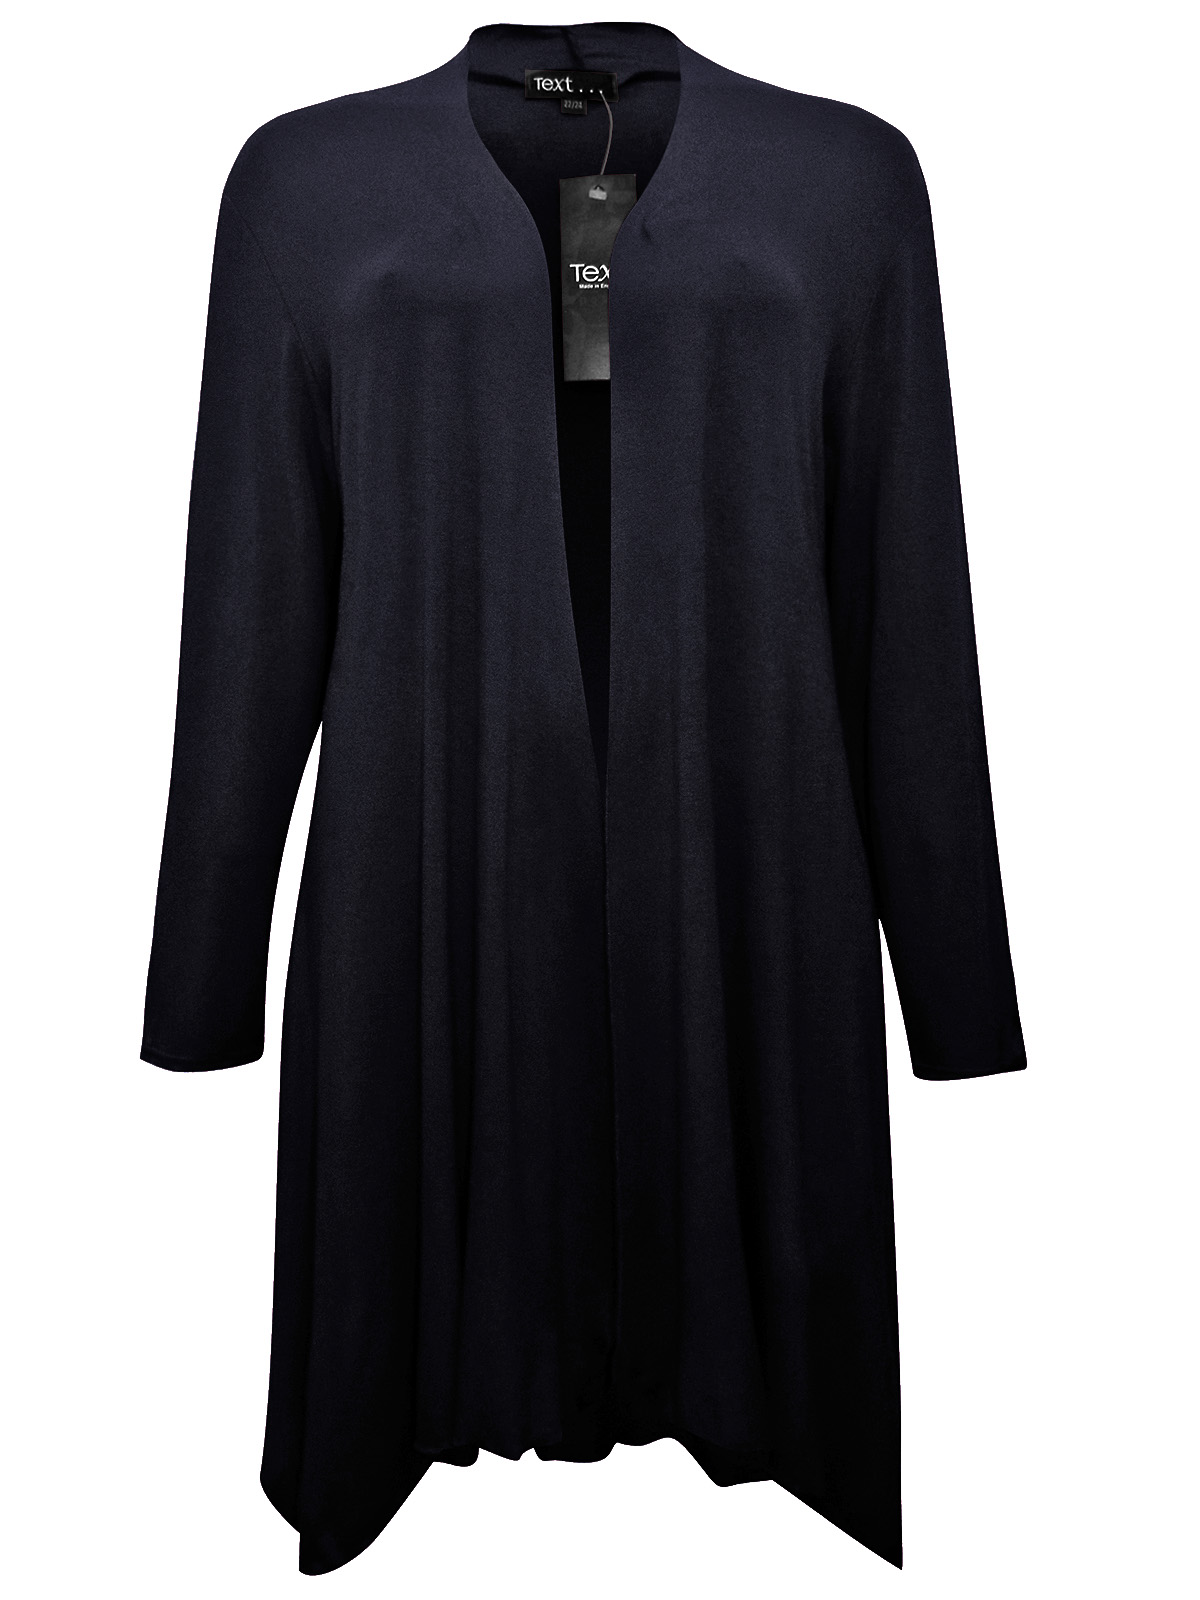 //text.. - - DARK-NAVY Open Front Long Sleeve Jersey Cardigan w/Pockets - Plus Size 18/20 to